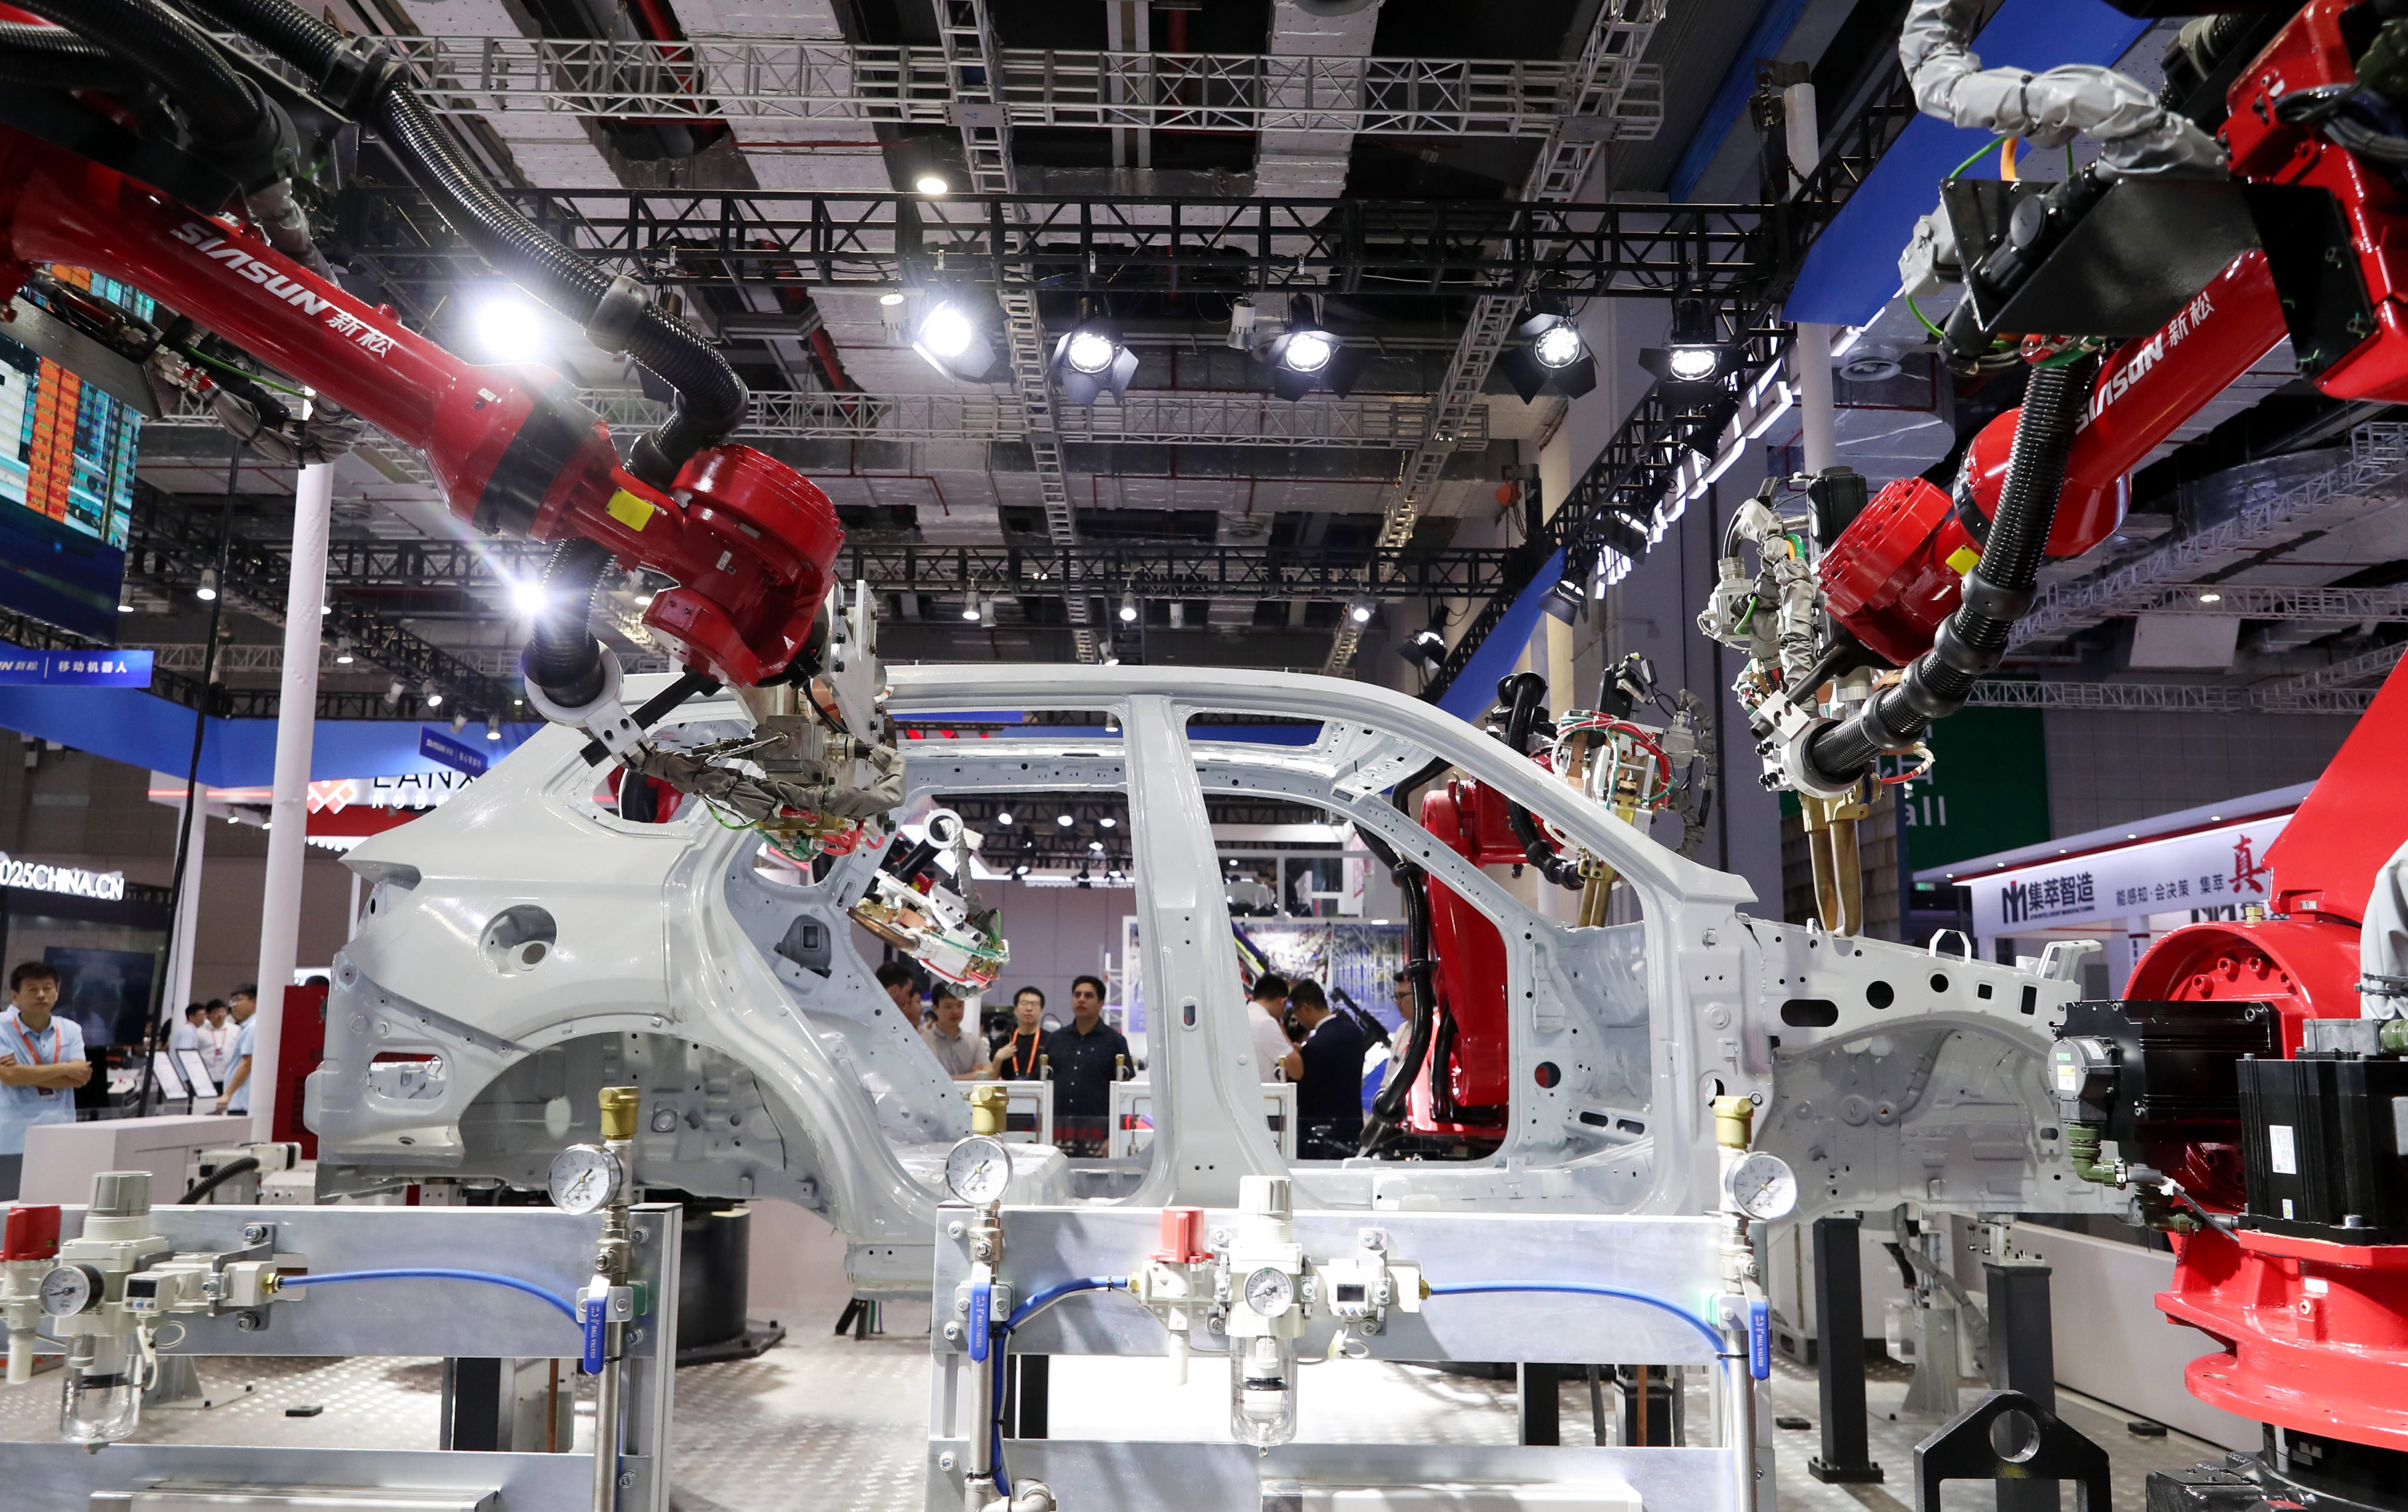 Visitors watch a robot perform welding on the body of a car at the China International Industry Fair in Shanghai on September 19. Photo: Xinhua